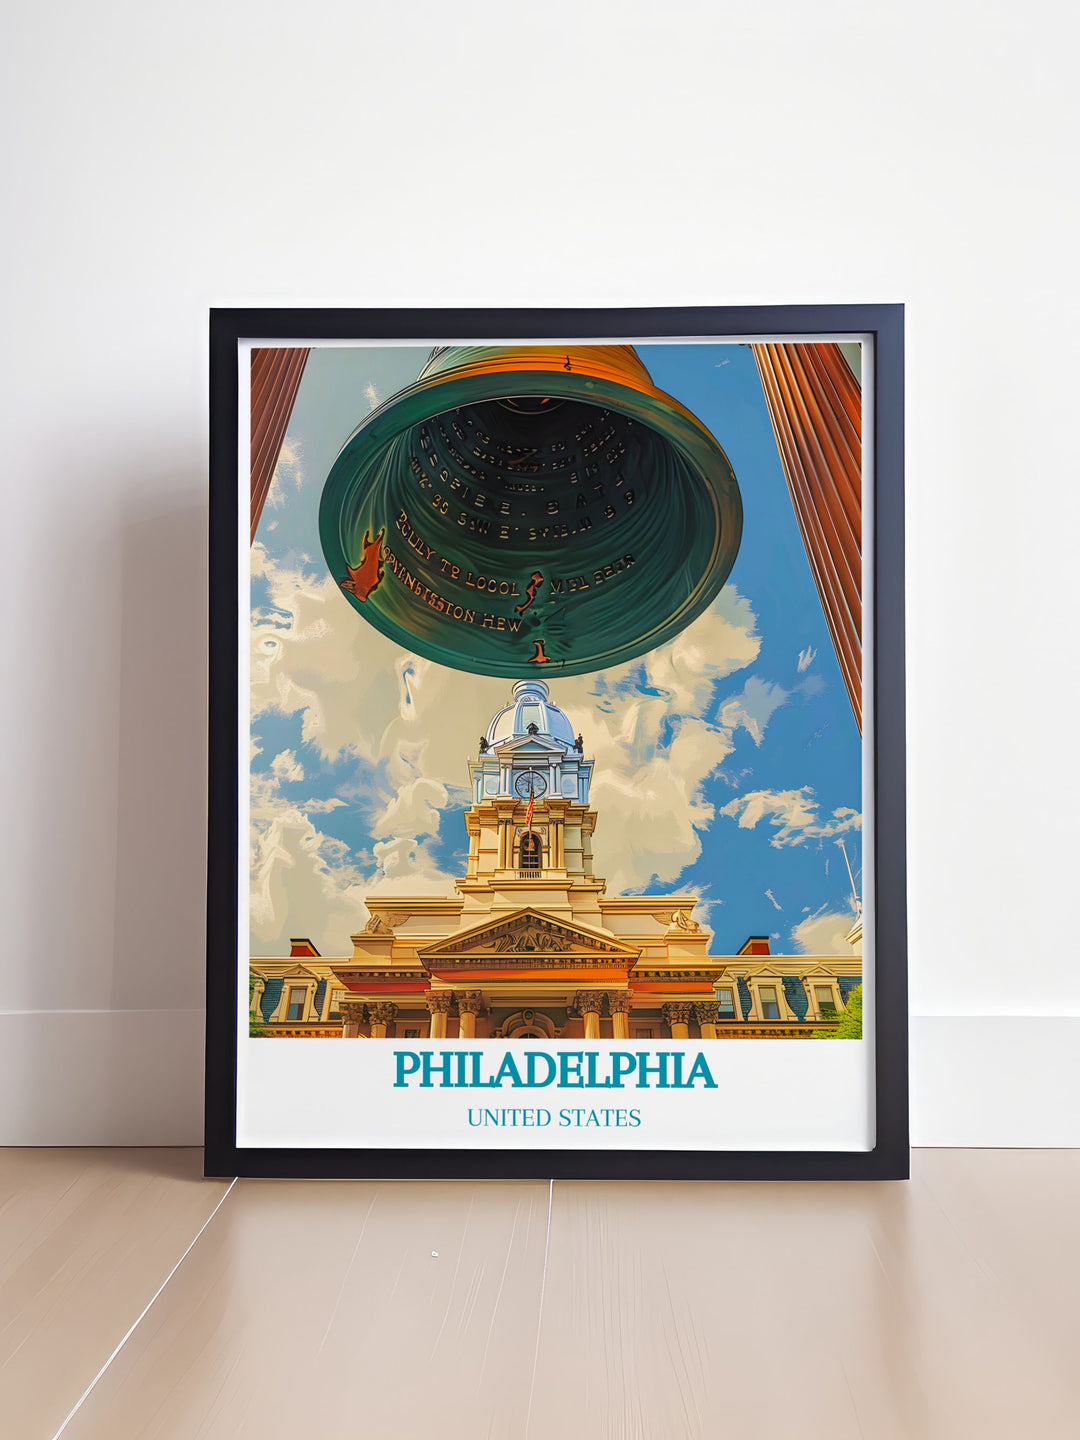 Explore the historical landmarks of Philadelphia through this exquisite travel poster, highlighting the Liberty Bell and its role in American history.